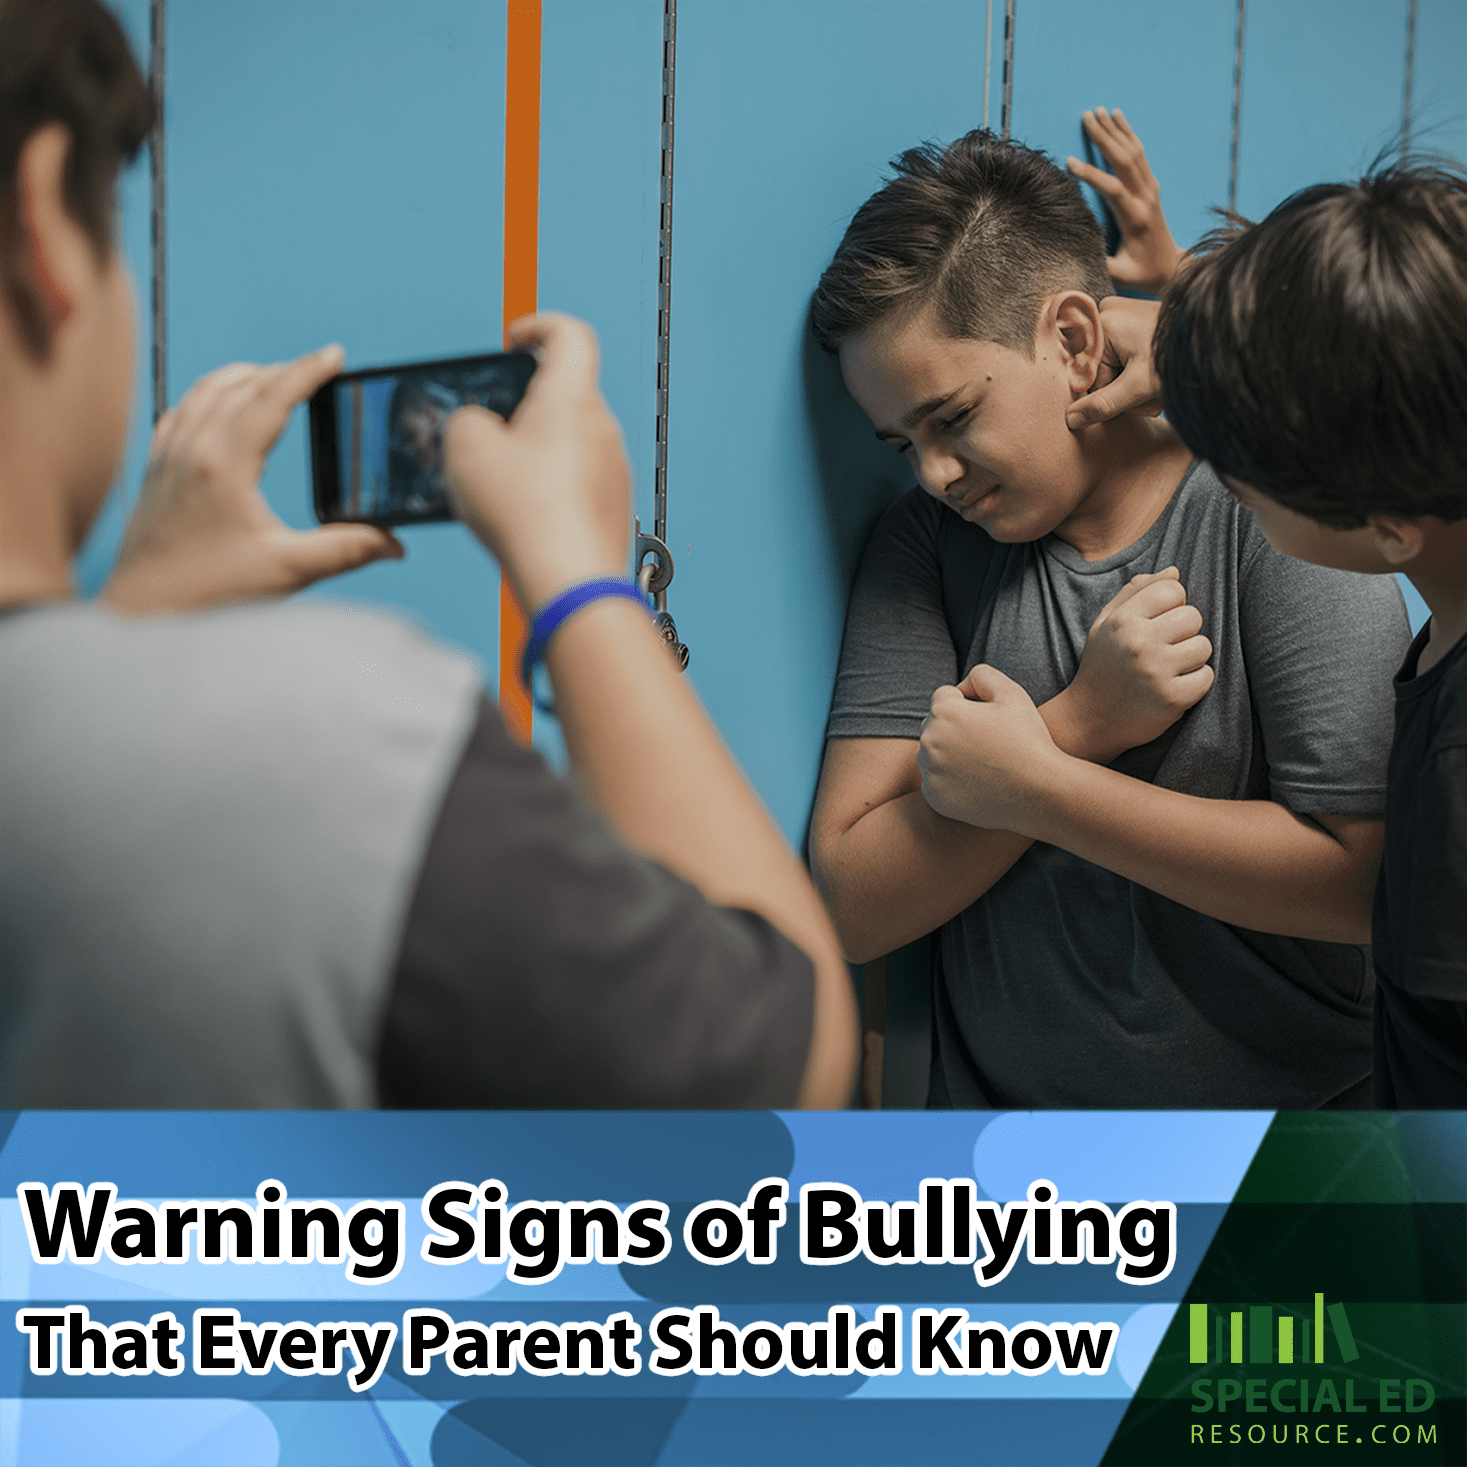 Group of boys bullying one boy at school. Read the warning signs of bullying that every parent should know.